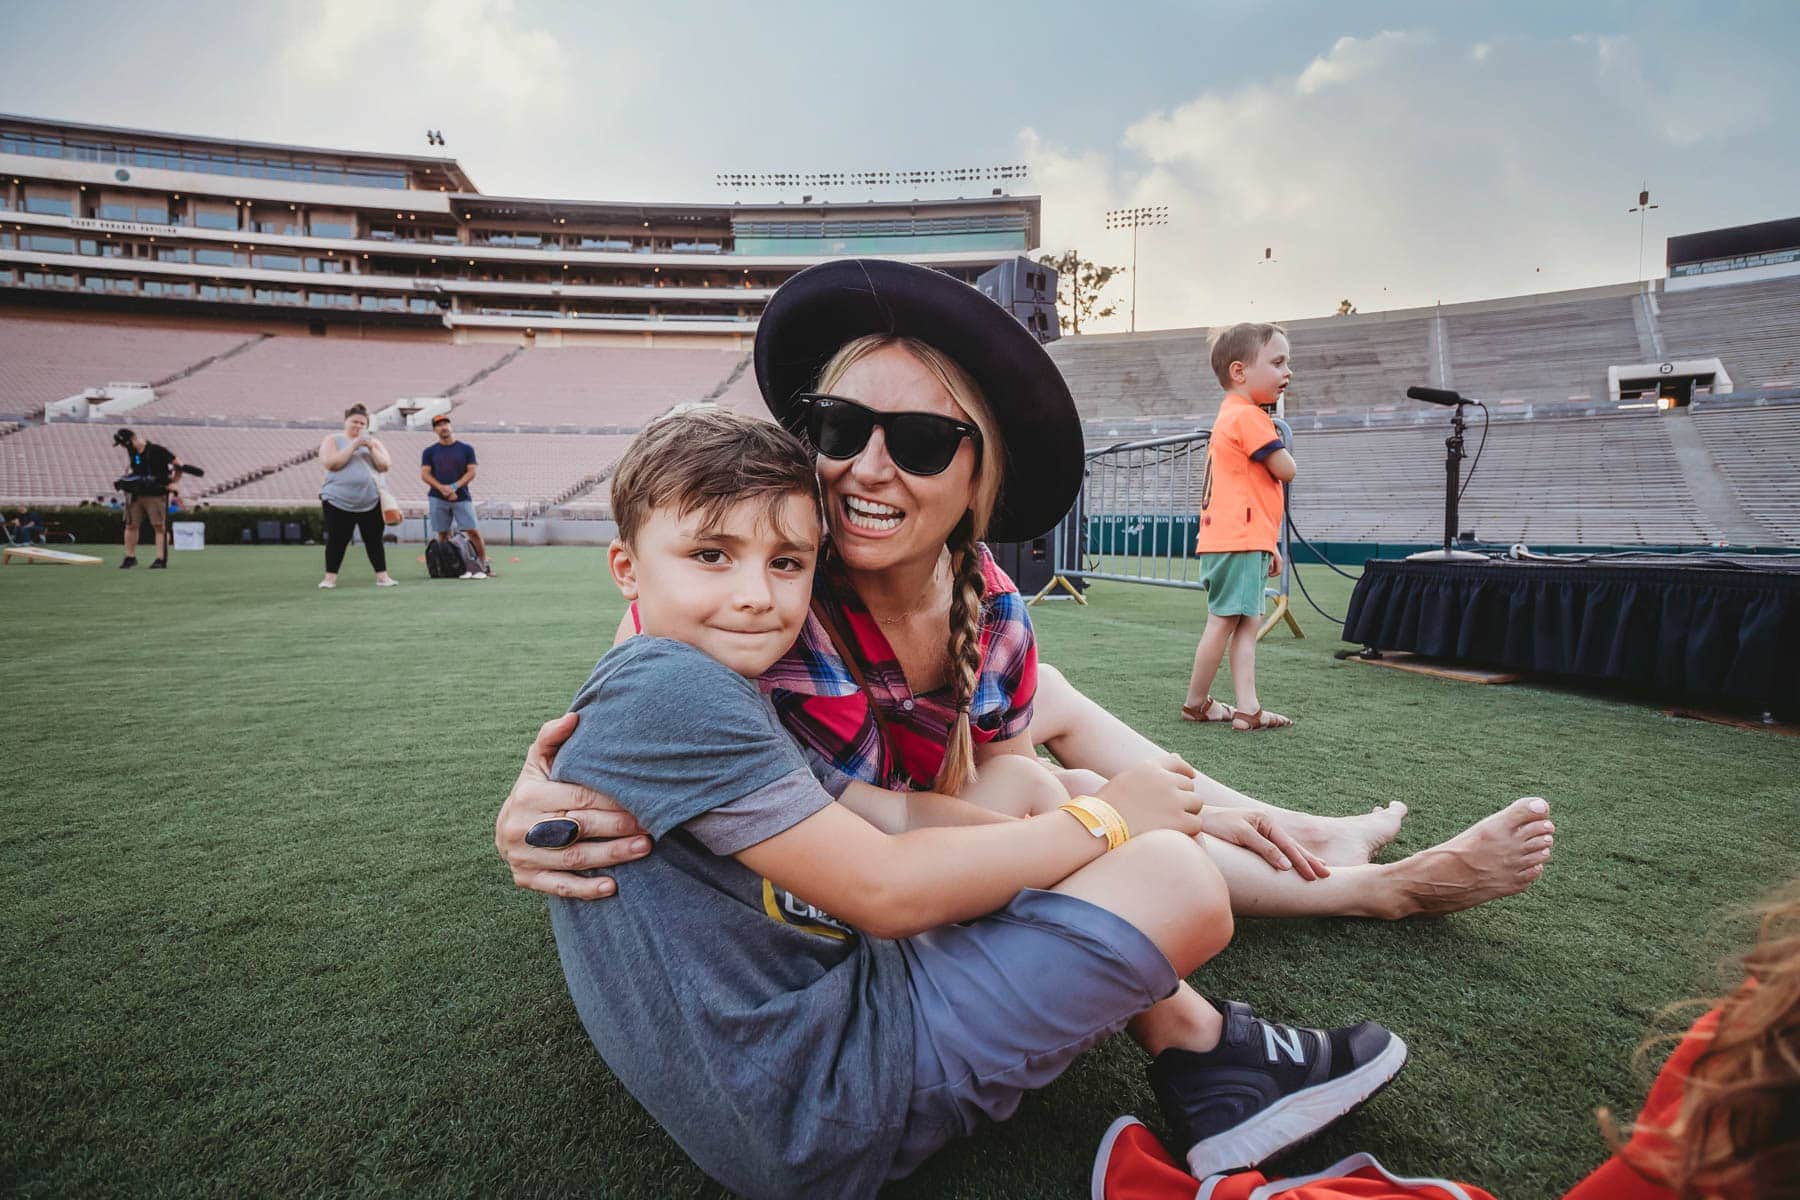 Childhood Cancer is an awful diagnosis. All kids deserve a night to remember and that's exactly what Northwestern Mutual did for their night to remember at the Rose Bowl Stadium! #childhoodcancerawareness #rosebowlstadiumcampout #campoutforkids #cancerawareness #rosebudscampout #rosebowlstadium #pasadena #california #citygirlgonemom #camping #footballstadium